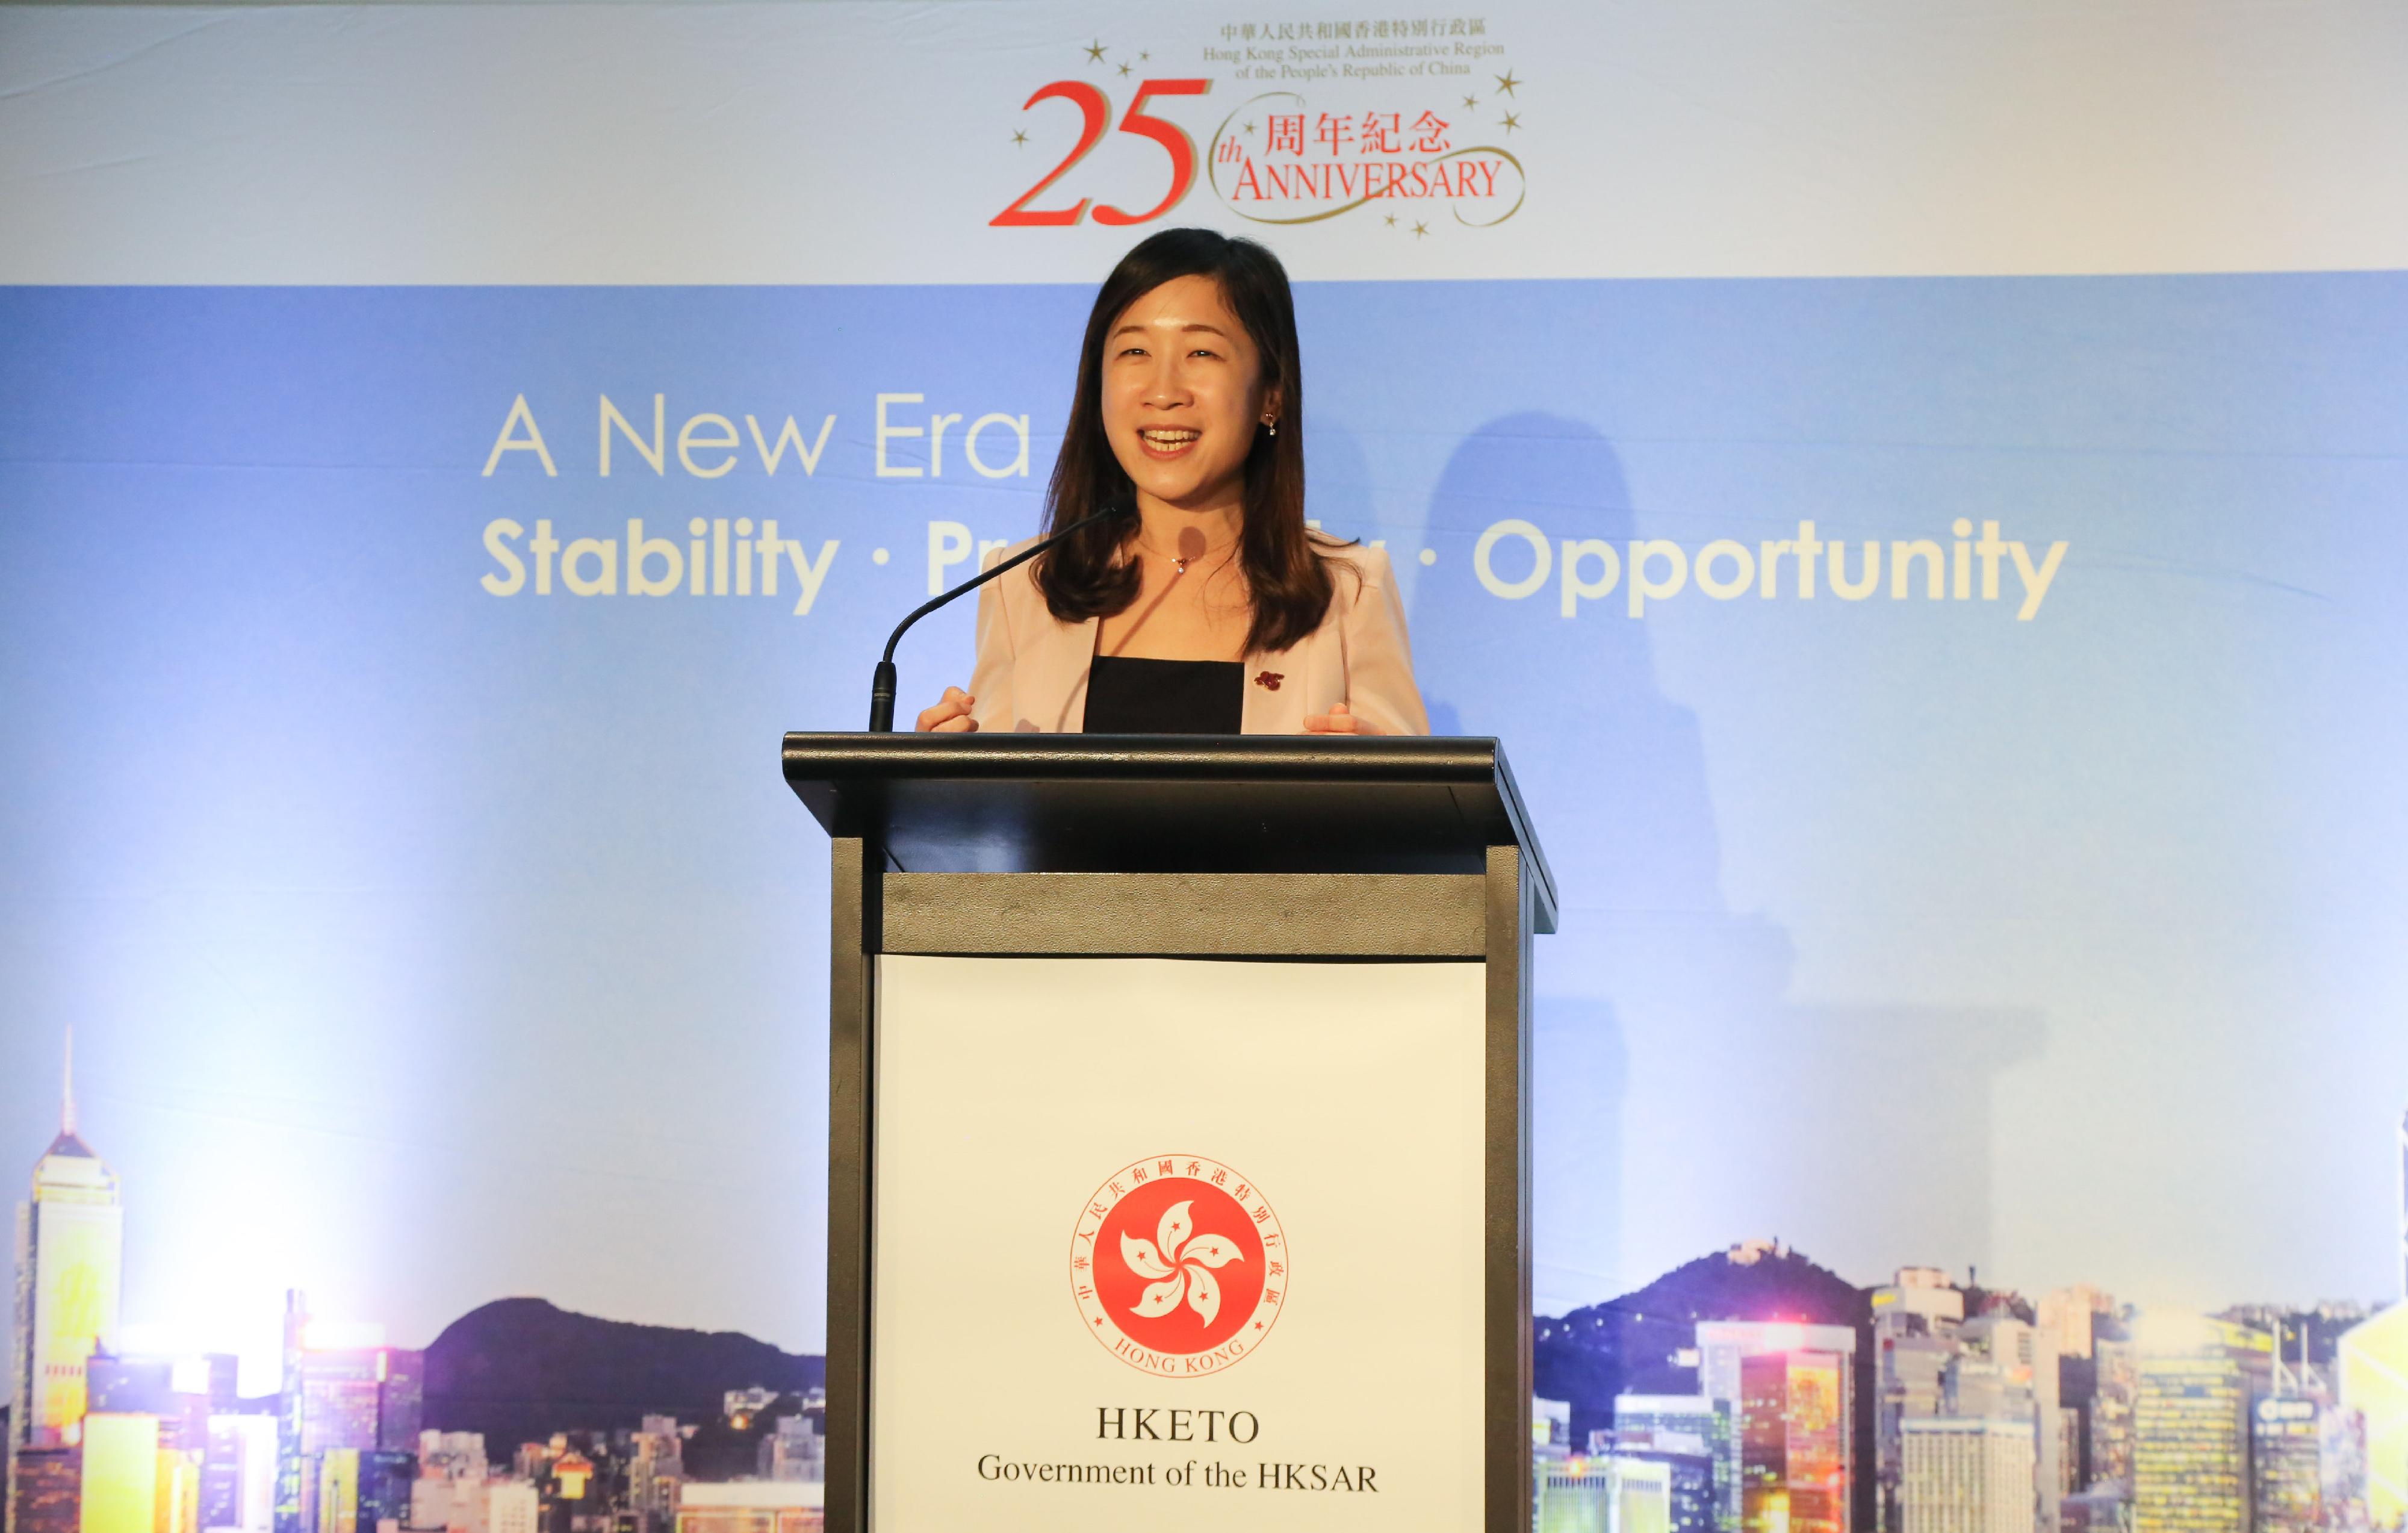 The Director of the Hong Kong Economic and Trade Office, Sydney, Miss Trista Lim, delivers a welcoming speech at the reception held in Auckland, New Zealand, today (August 2) to celebrate the 25th anniversary of the establishment of the Hong Kong Special Administrative Region.